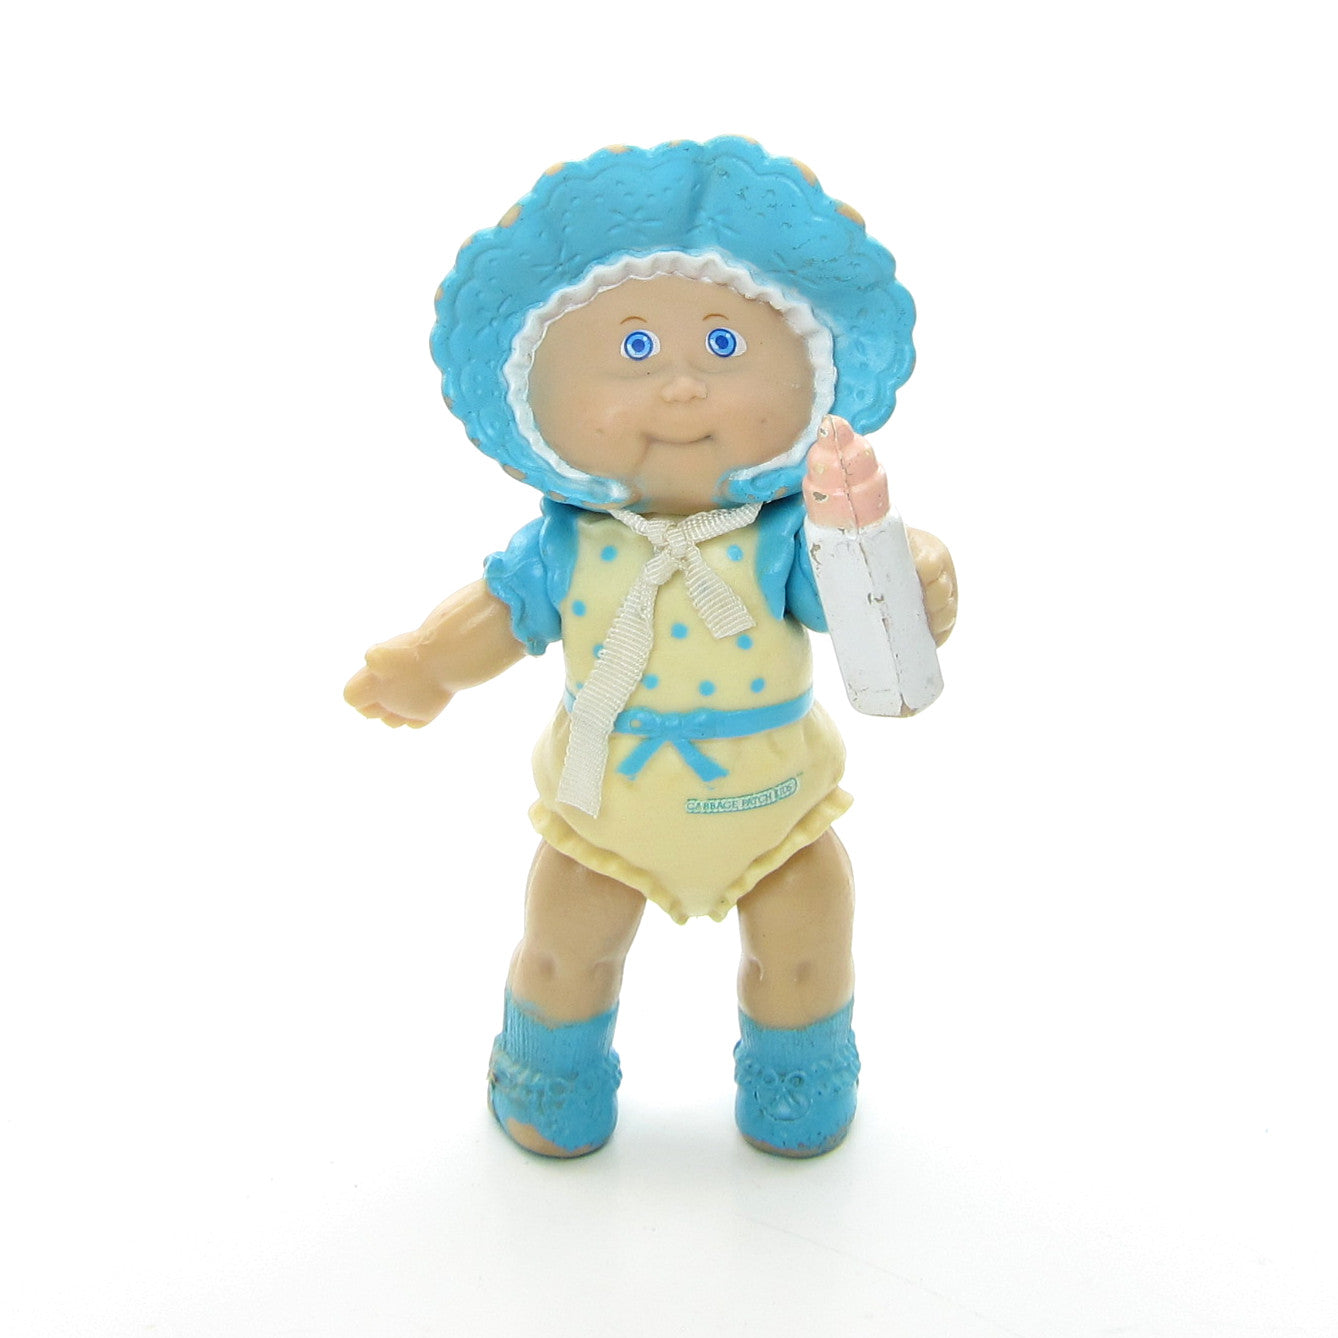 Preemie girl with blue bonnet and bottle Cabbage Patch Kids poseable figure